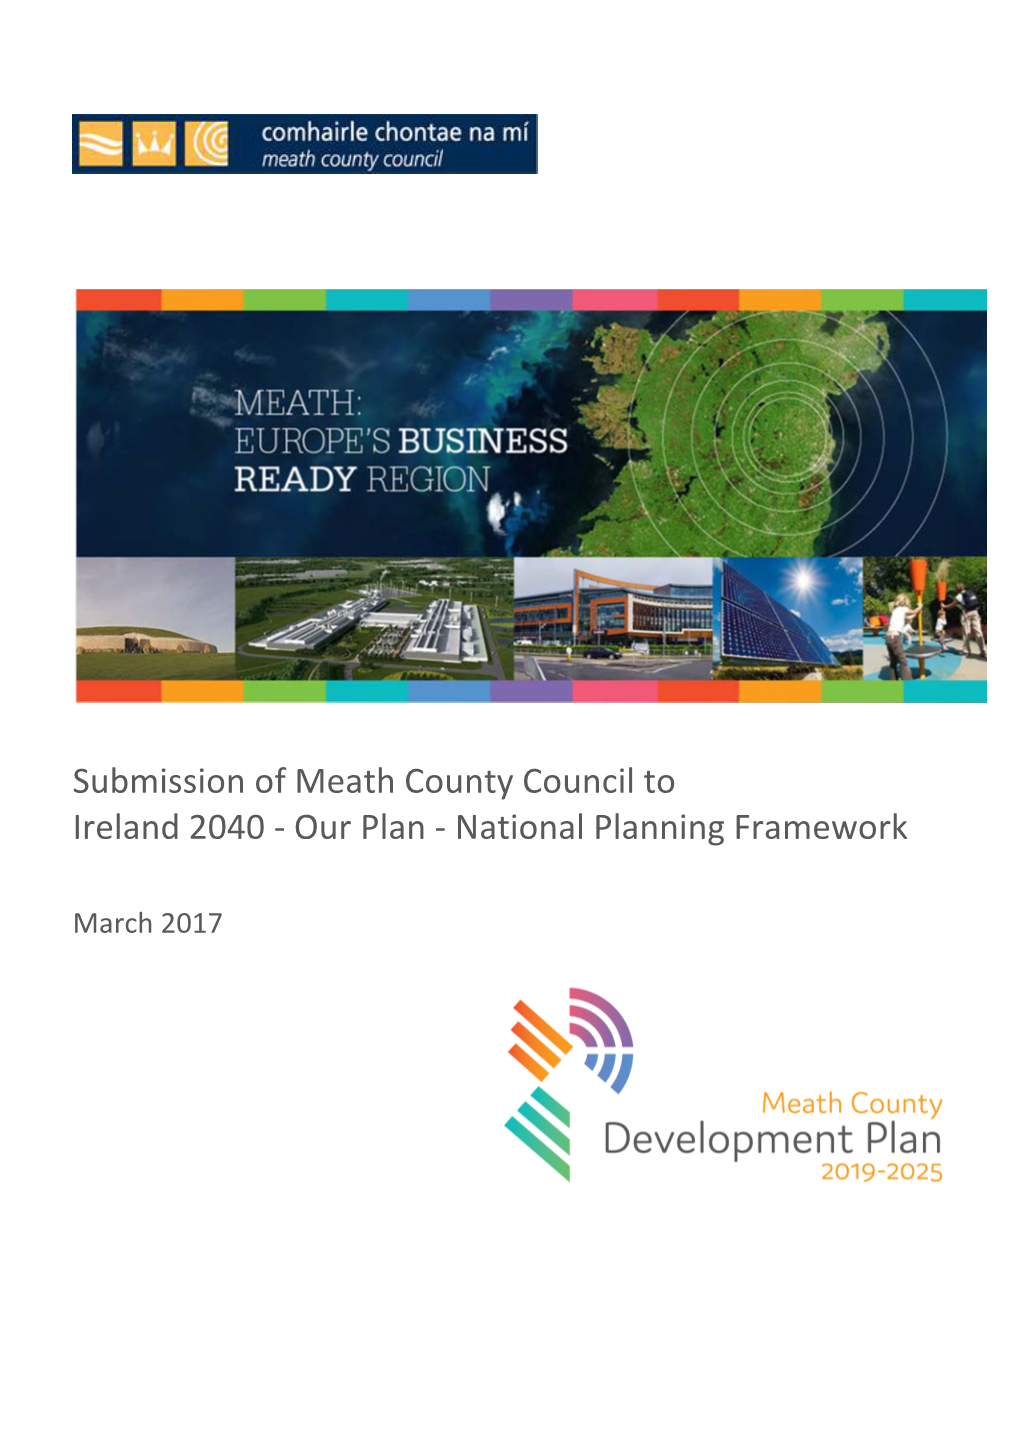 Submission of Meath County Council to Ireland 2040 - Our Plan - National Planning Framework